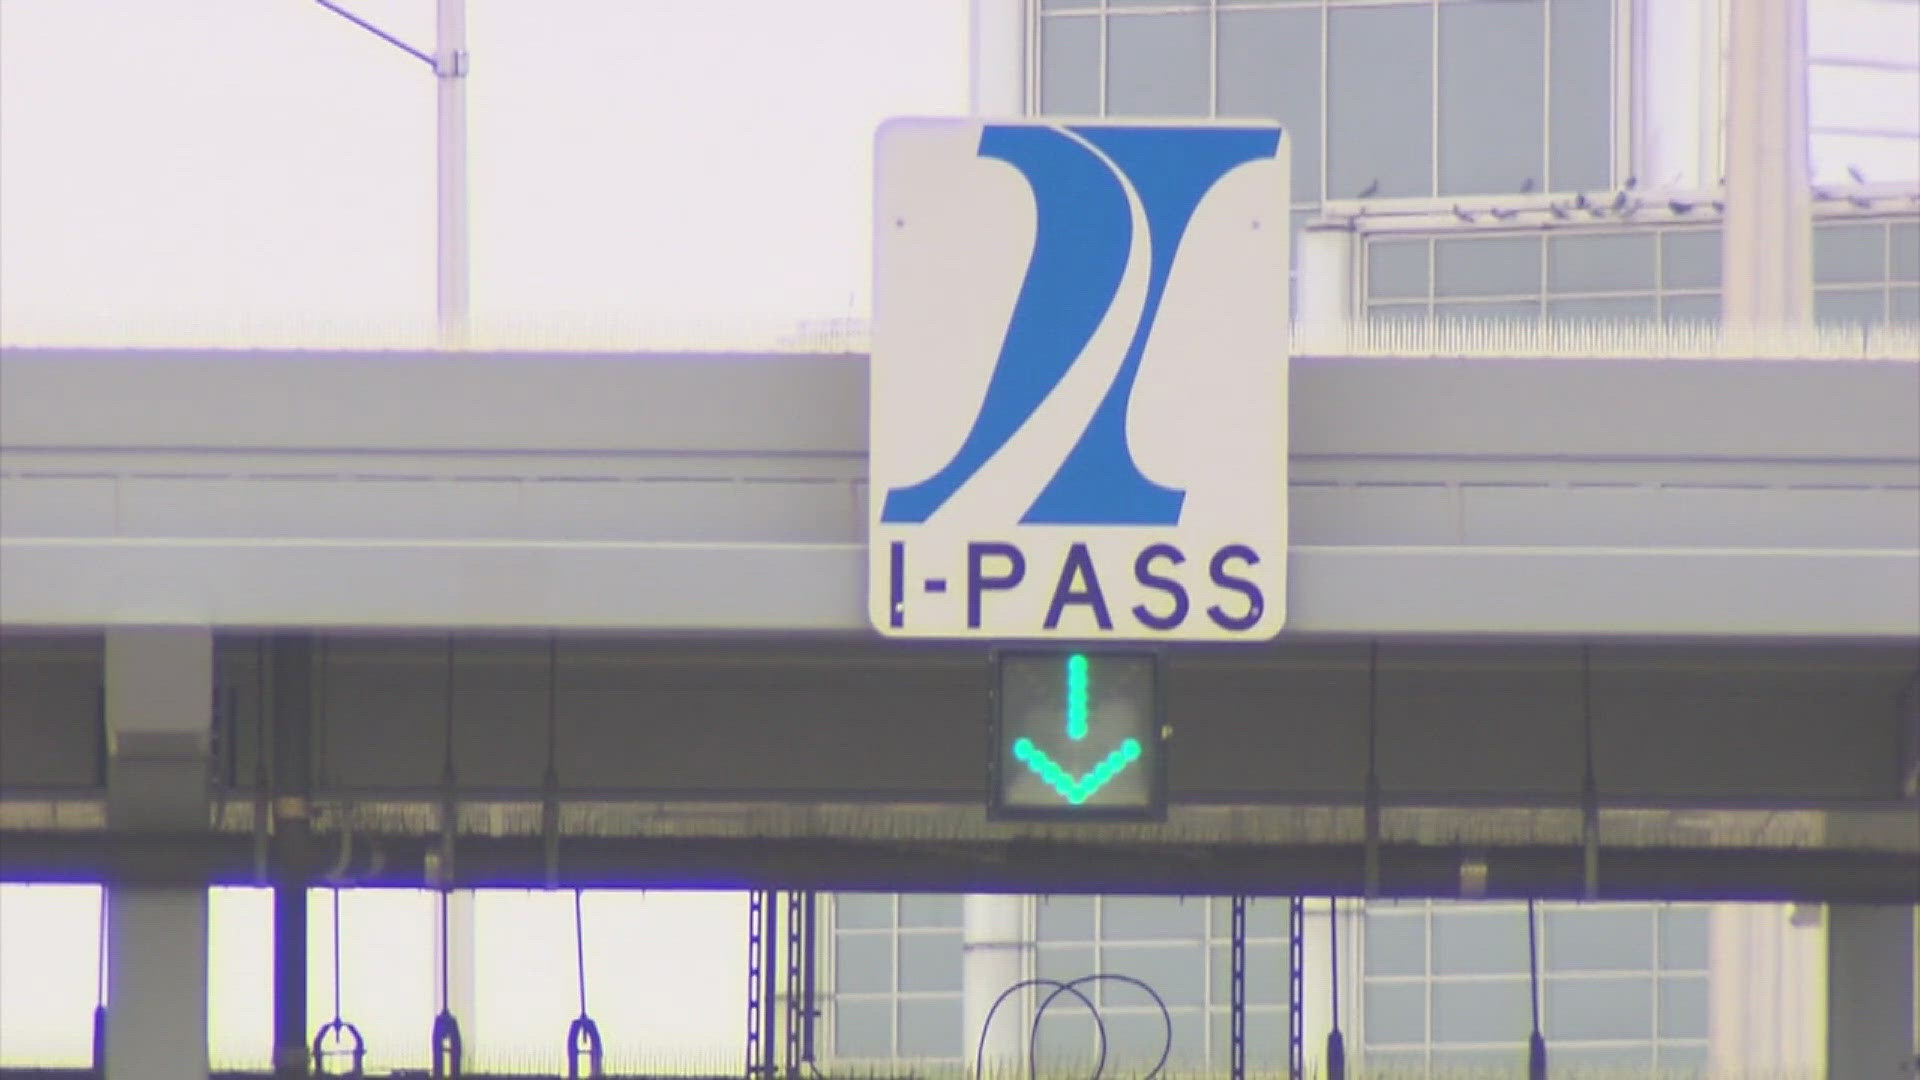 The patrol service is expected to operate on all 294 miles of the Illinois Tollway. However, officials say drivers should make sure their cars are serviced properly.